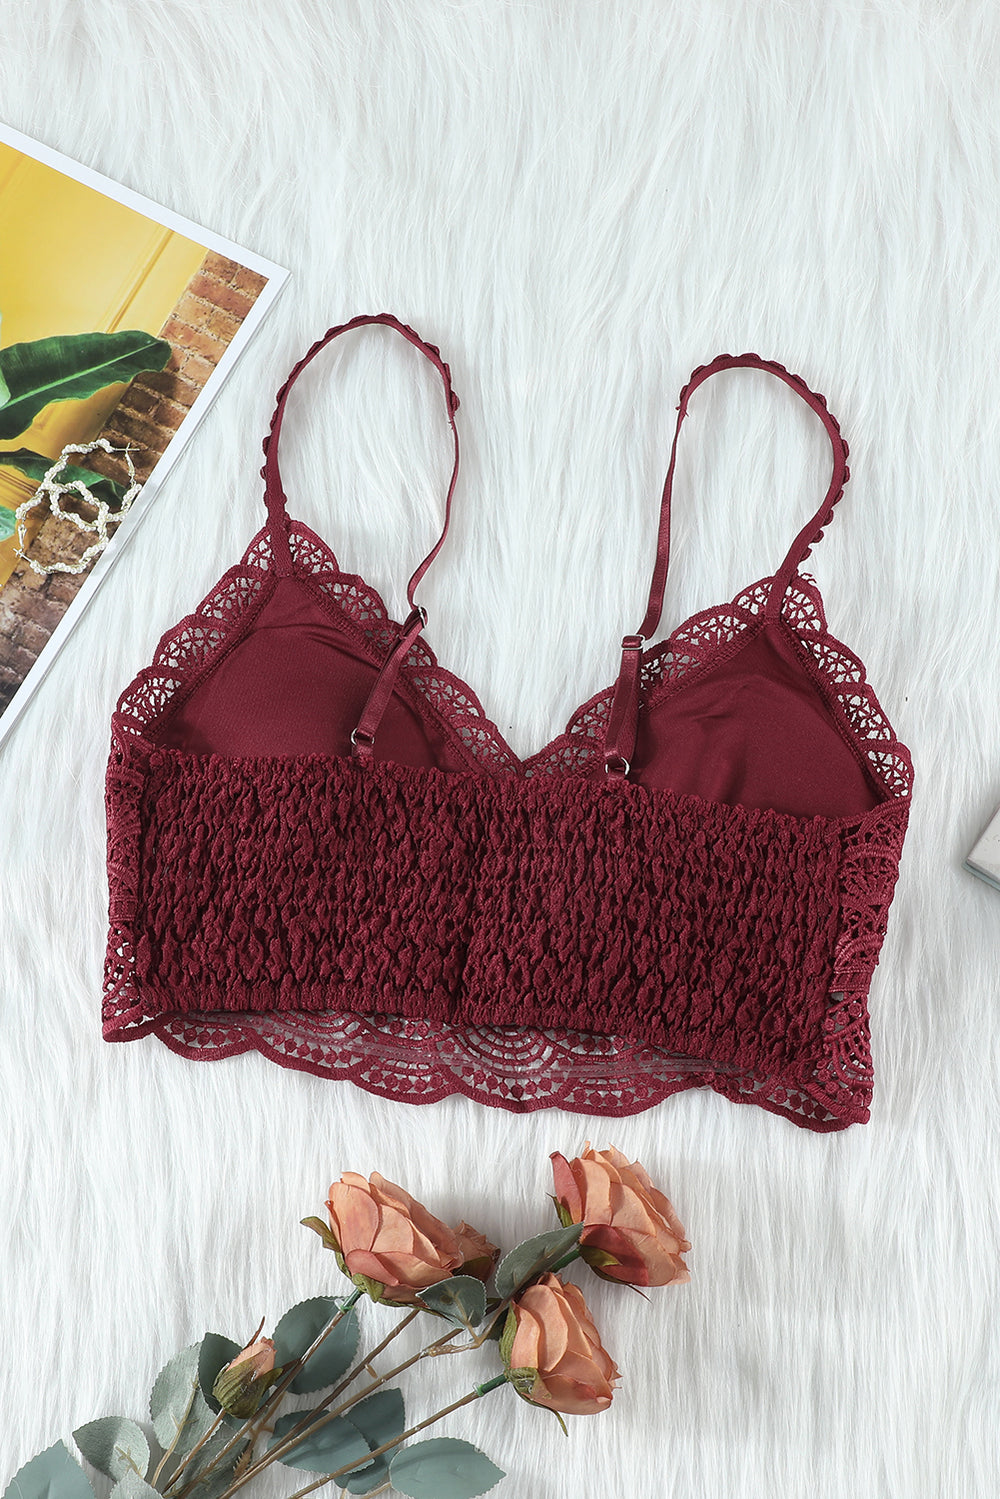 Cheap Bralettes online, Buy Bralettes for women at wholesale price